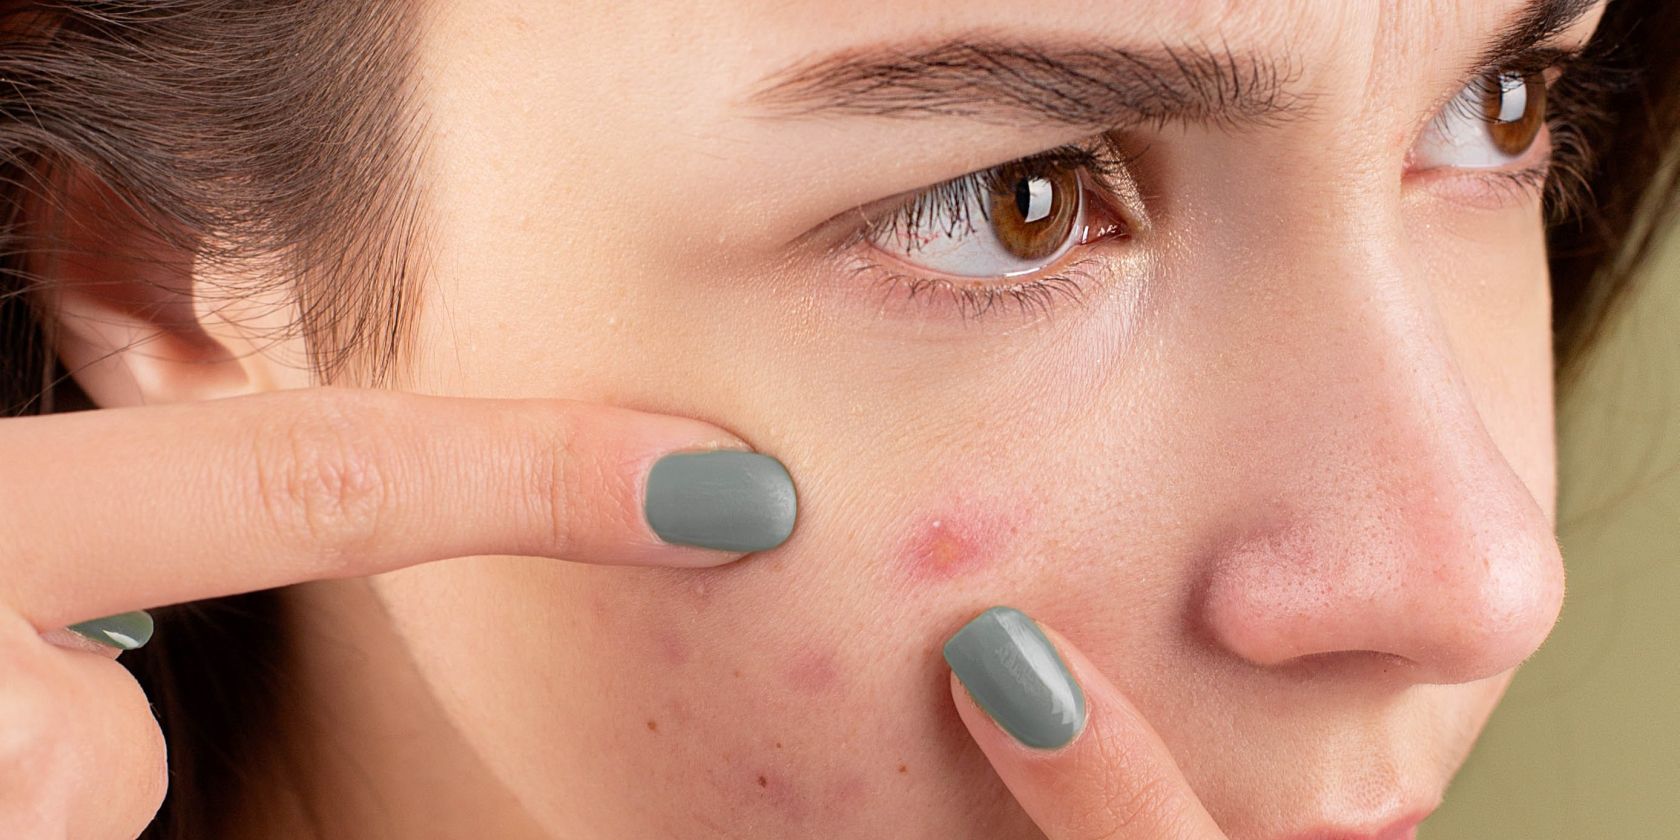 Struggling With Acne? You Need to Use These 6 Apps